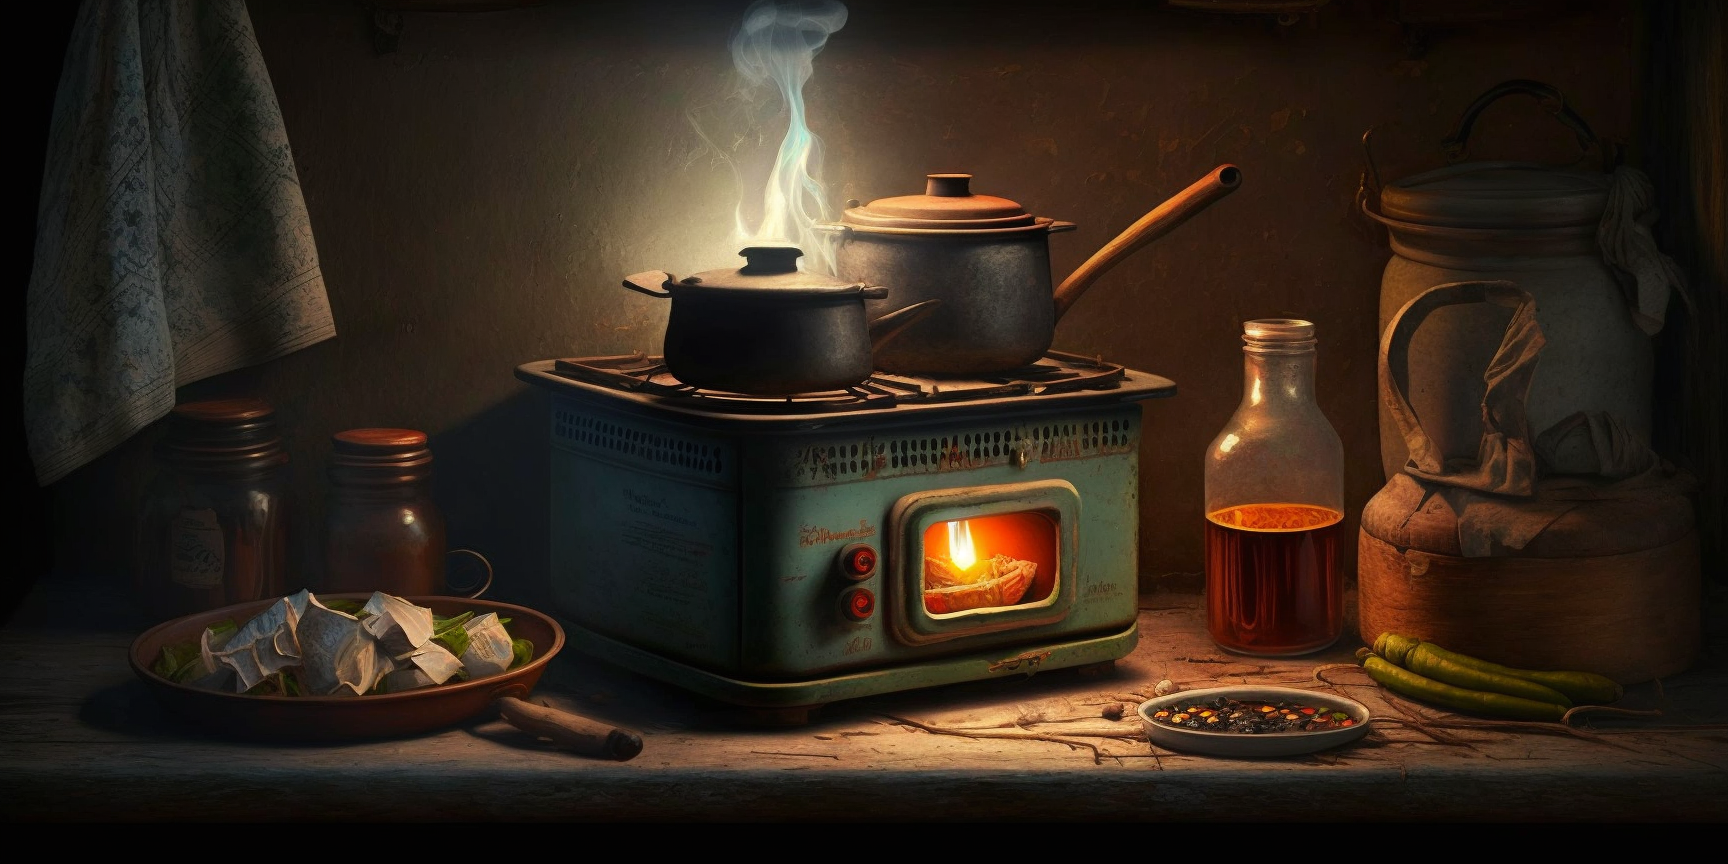 How to Cook Without Electricity: Tips for Survival